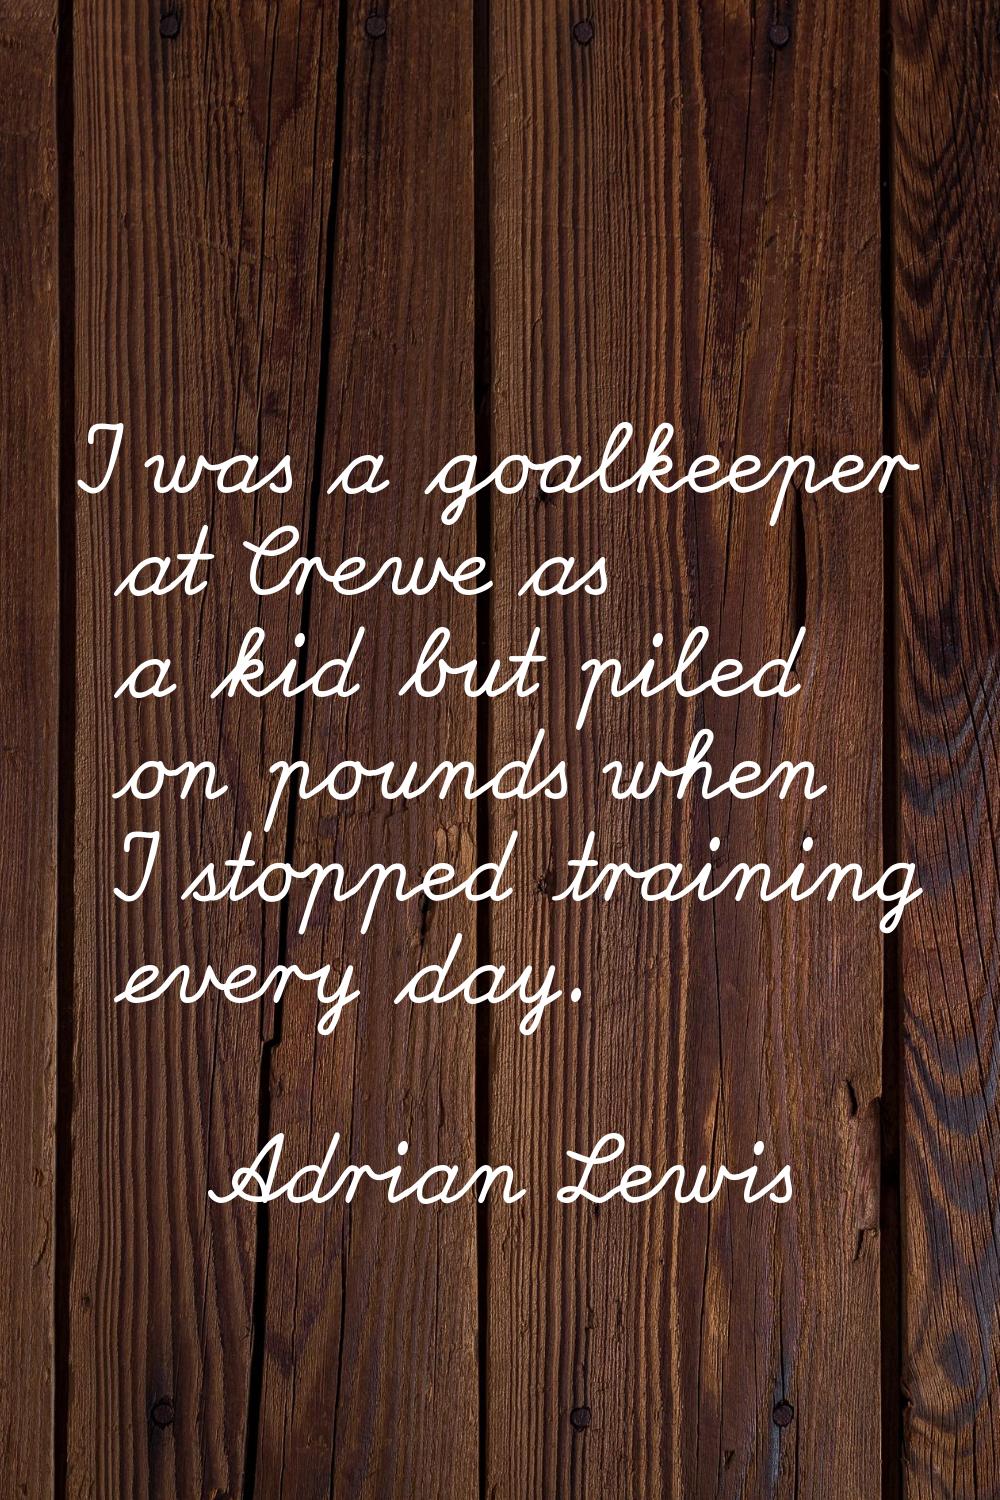 I was a goalkeeper at Crewe as a kid but piled on pounds when I stopped training every day.